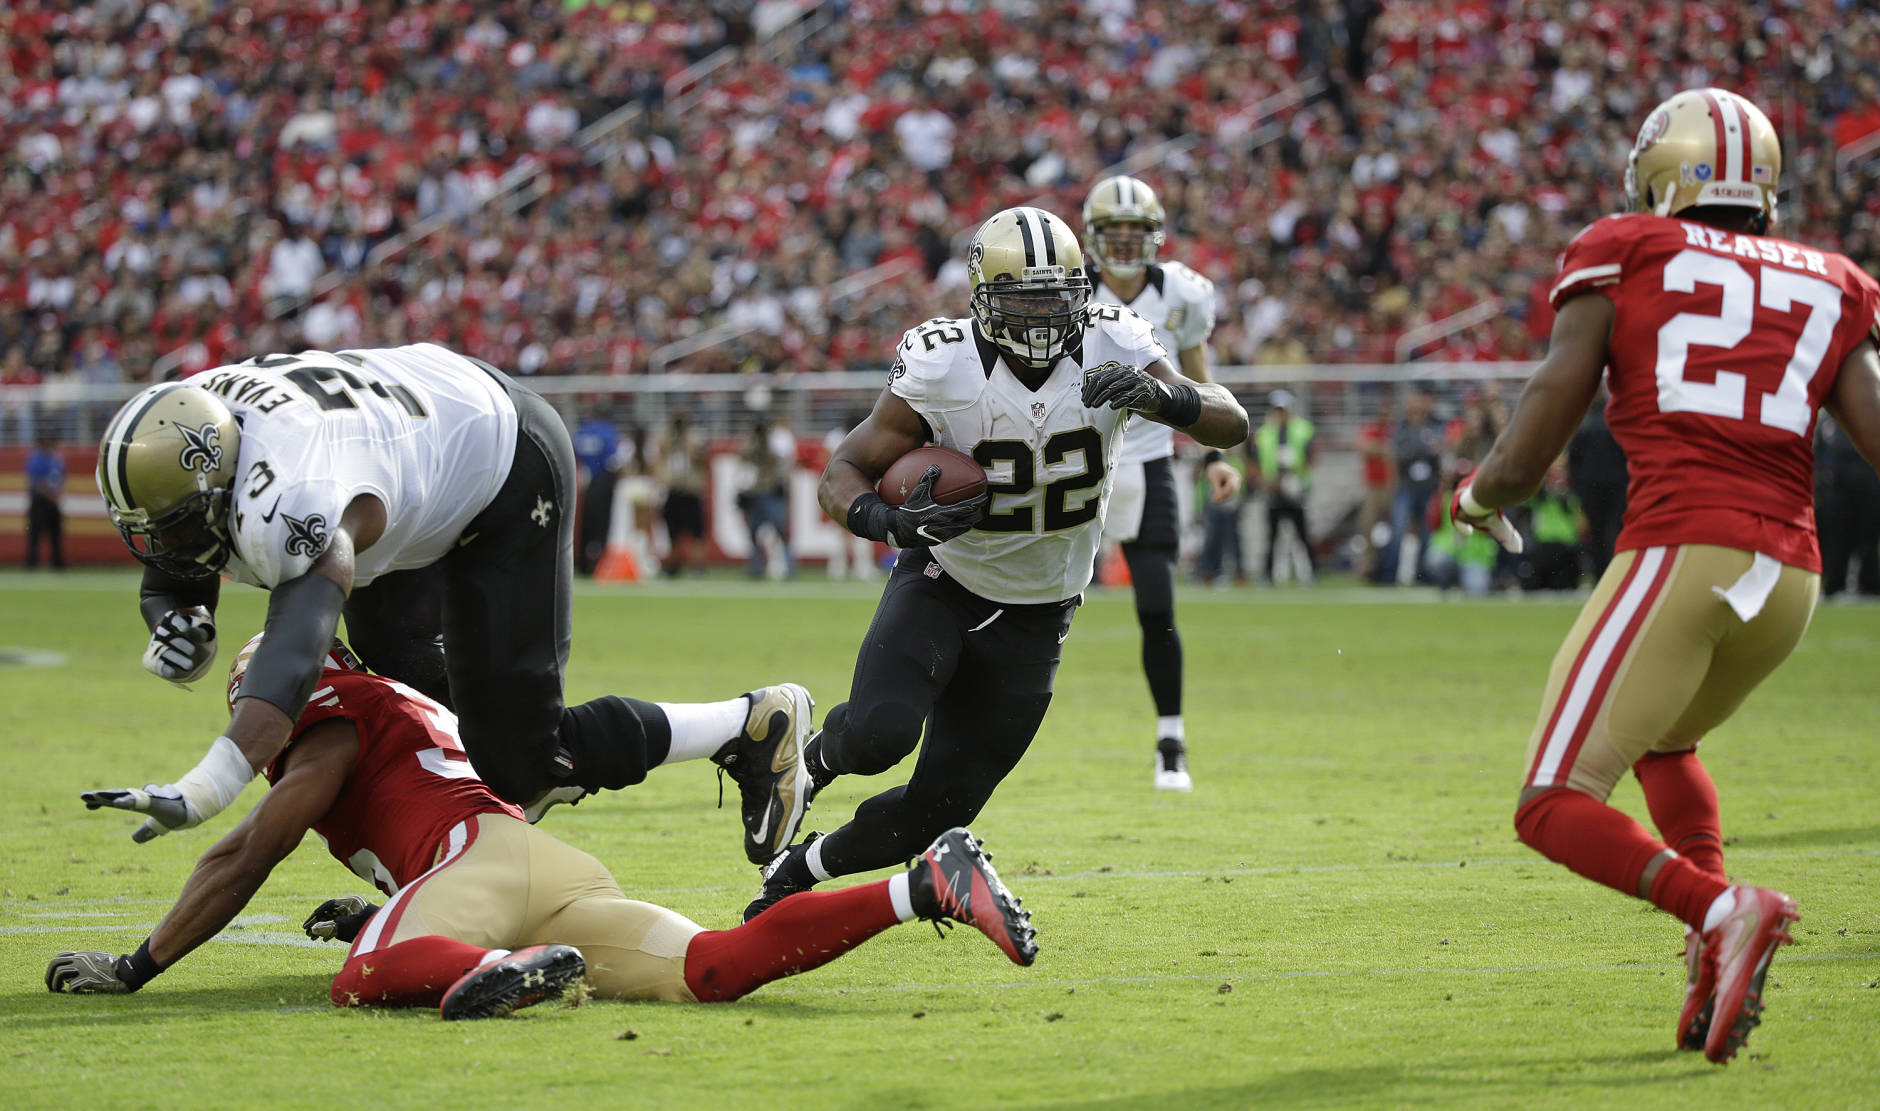 New Orleans Saints running back Mark Ingram (22) carries the ball for a touchdown during the first half of an NFL football game against the San Francisco 49ers Sunday, Nov. 6, 2016, in Santa Clara, Calif. (AP Photo/Tony Avelar)